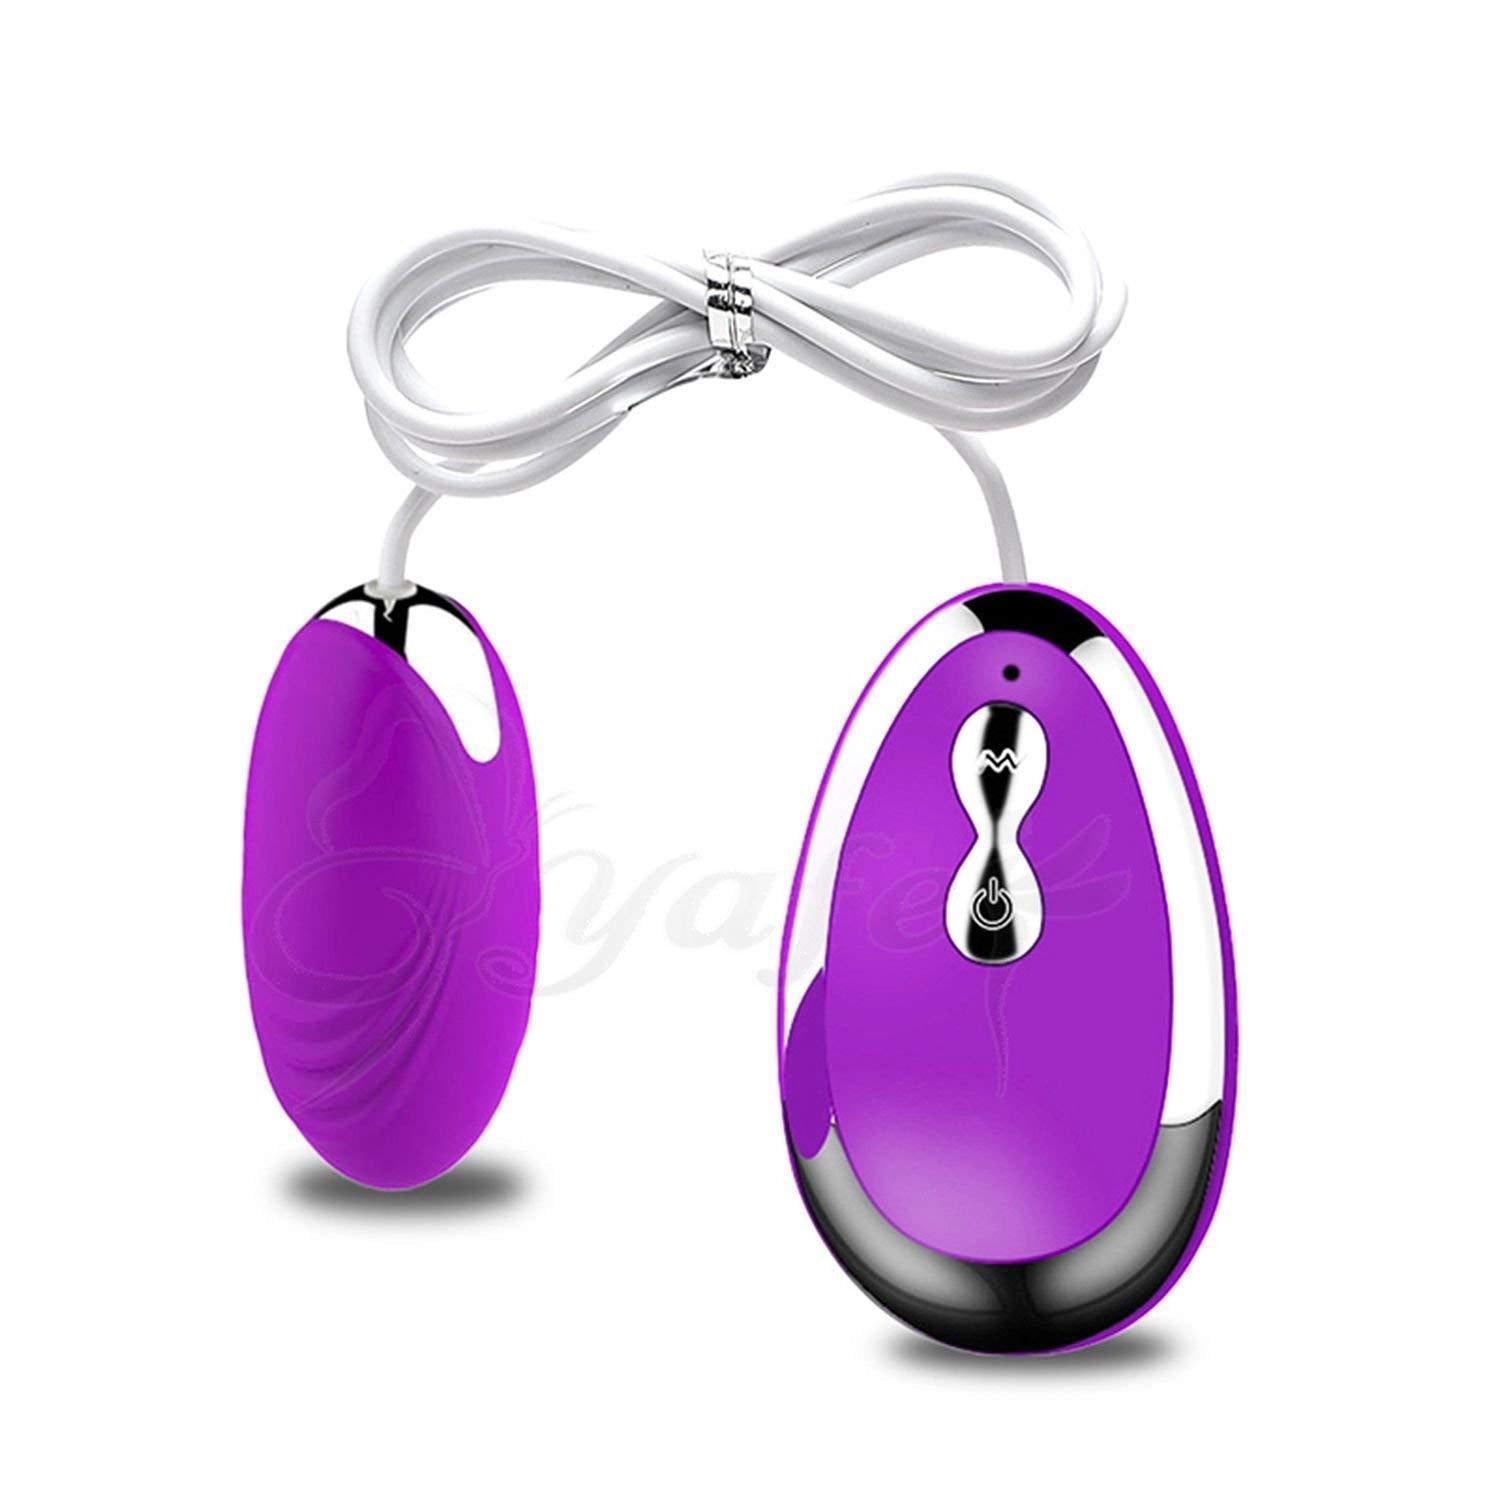 Remote Control Vibrating Egg 20 Speed Modes Available in Pakistan